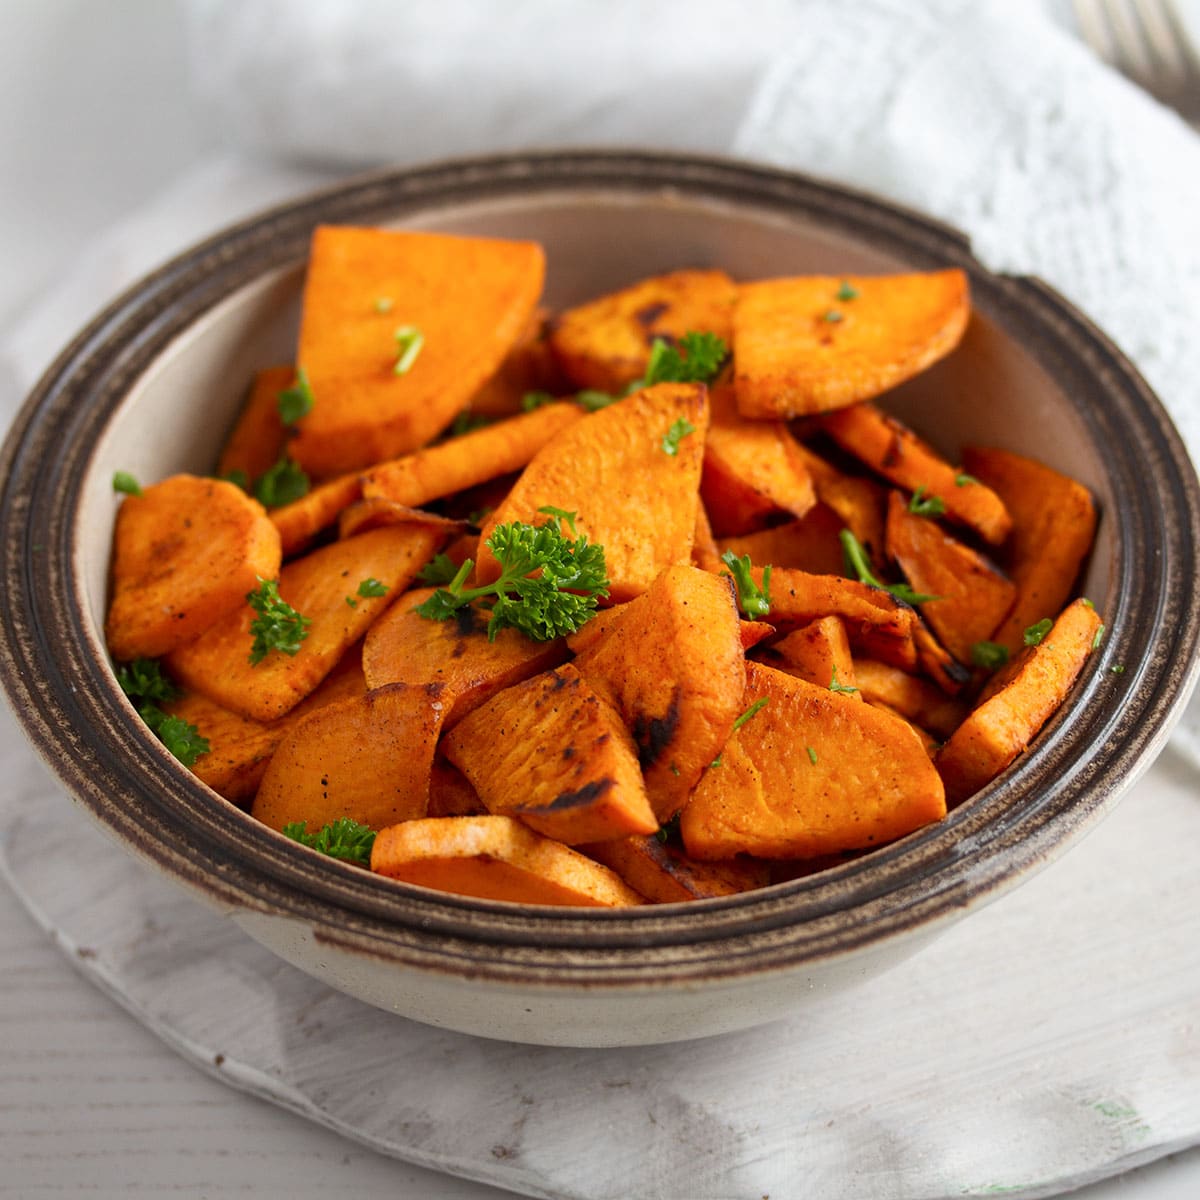 small bowl with sweet potatoes slices sprinkled with parsley.